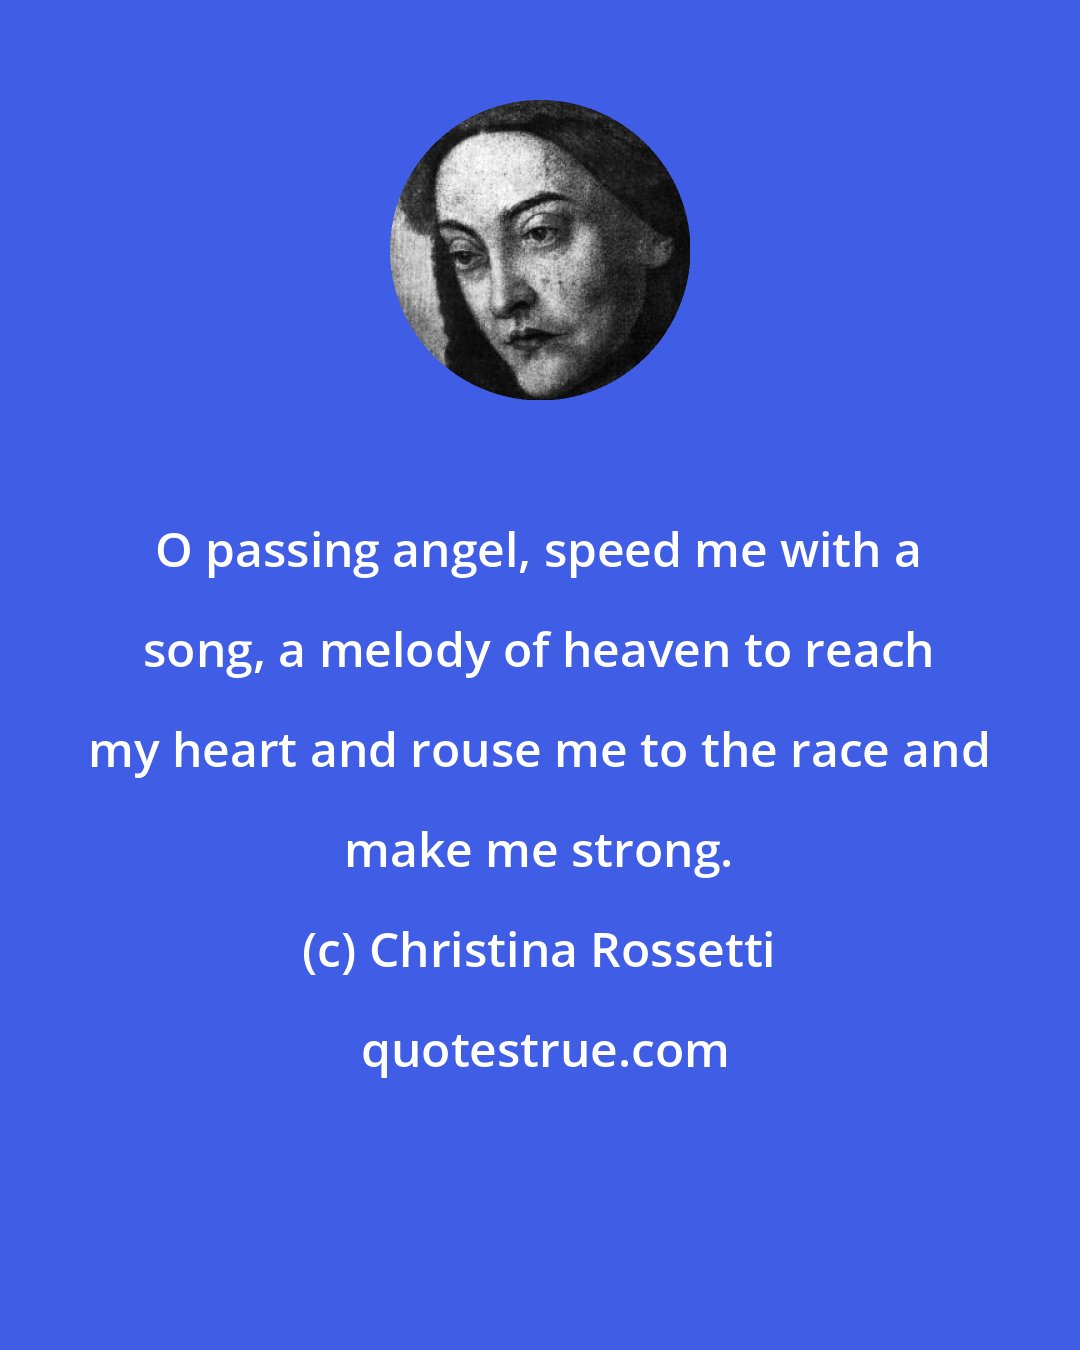 Christina Rossetti: O passing angel, speed me with a song, a melody of heaven to reach my heart and rouse me to the race and make me strong.